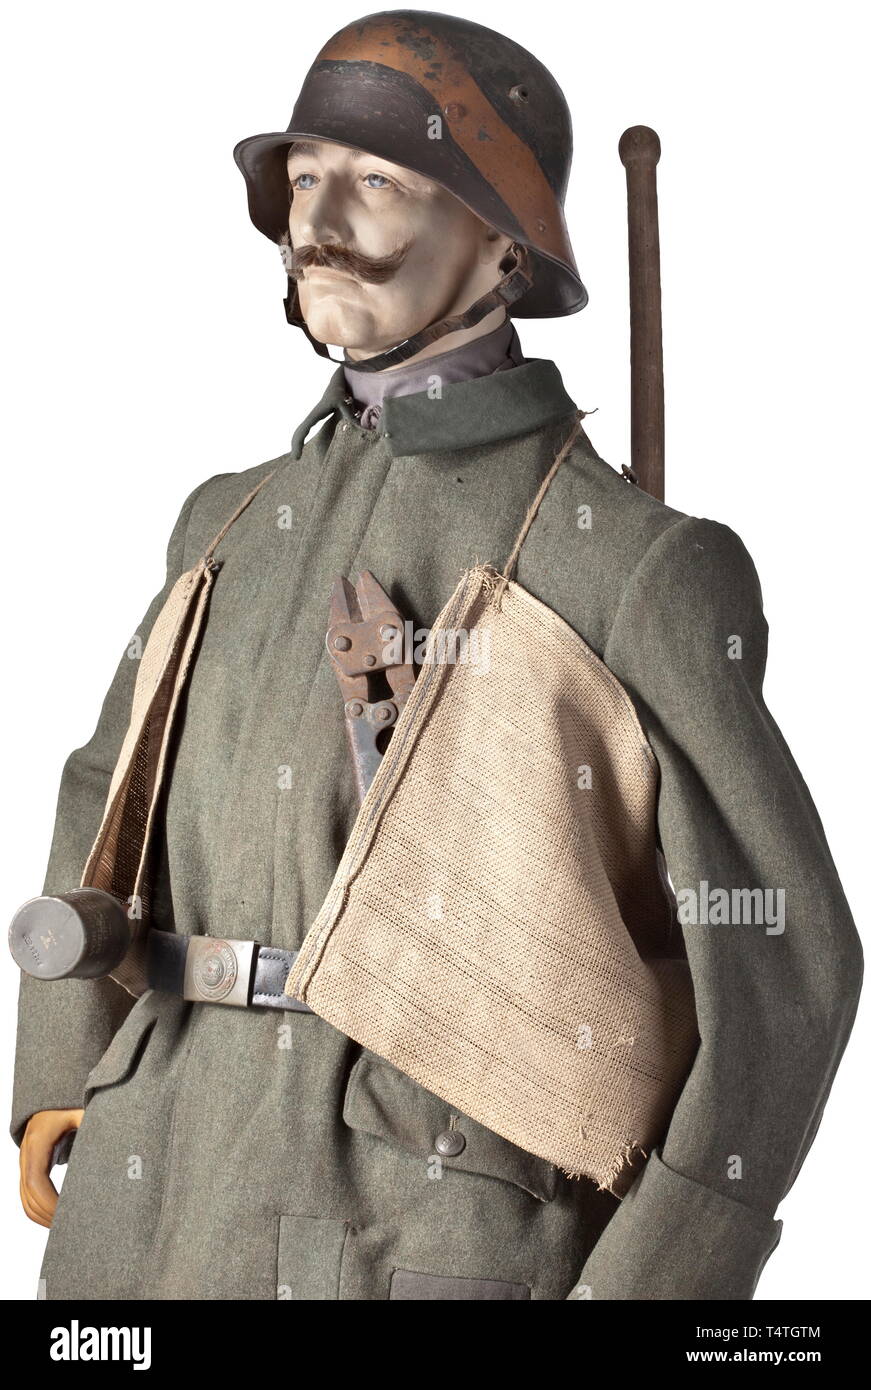 A uniform ensemble for an assault pioneer in trench warfare. Steel helmet M 1916 in 'Mimicry' camouflage with maker's marks. Three-piece inner liner, chin strap on button 91. Field-grey tunic M 1915 with folding collar, depot stamp inside. Grey field trousers with leather trim and depot stamp inside. Prussian belt buckle, painted field-grey with belt. Grey puttees (made later), leather lace-up boots with nailed soles. Wire cutters with maker 'Hückinghaus'. Hand grenade bag of heavy sackcloth. Hand grenade for decoration, with legend and pull cord, Additional-Rights-Clearance-Info-Not-Available Stock Photo